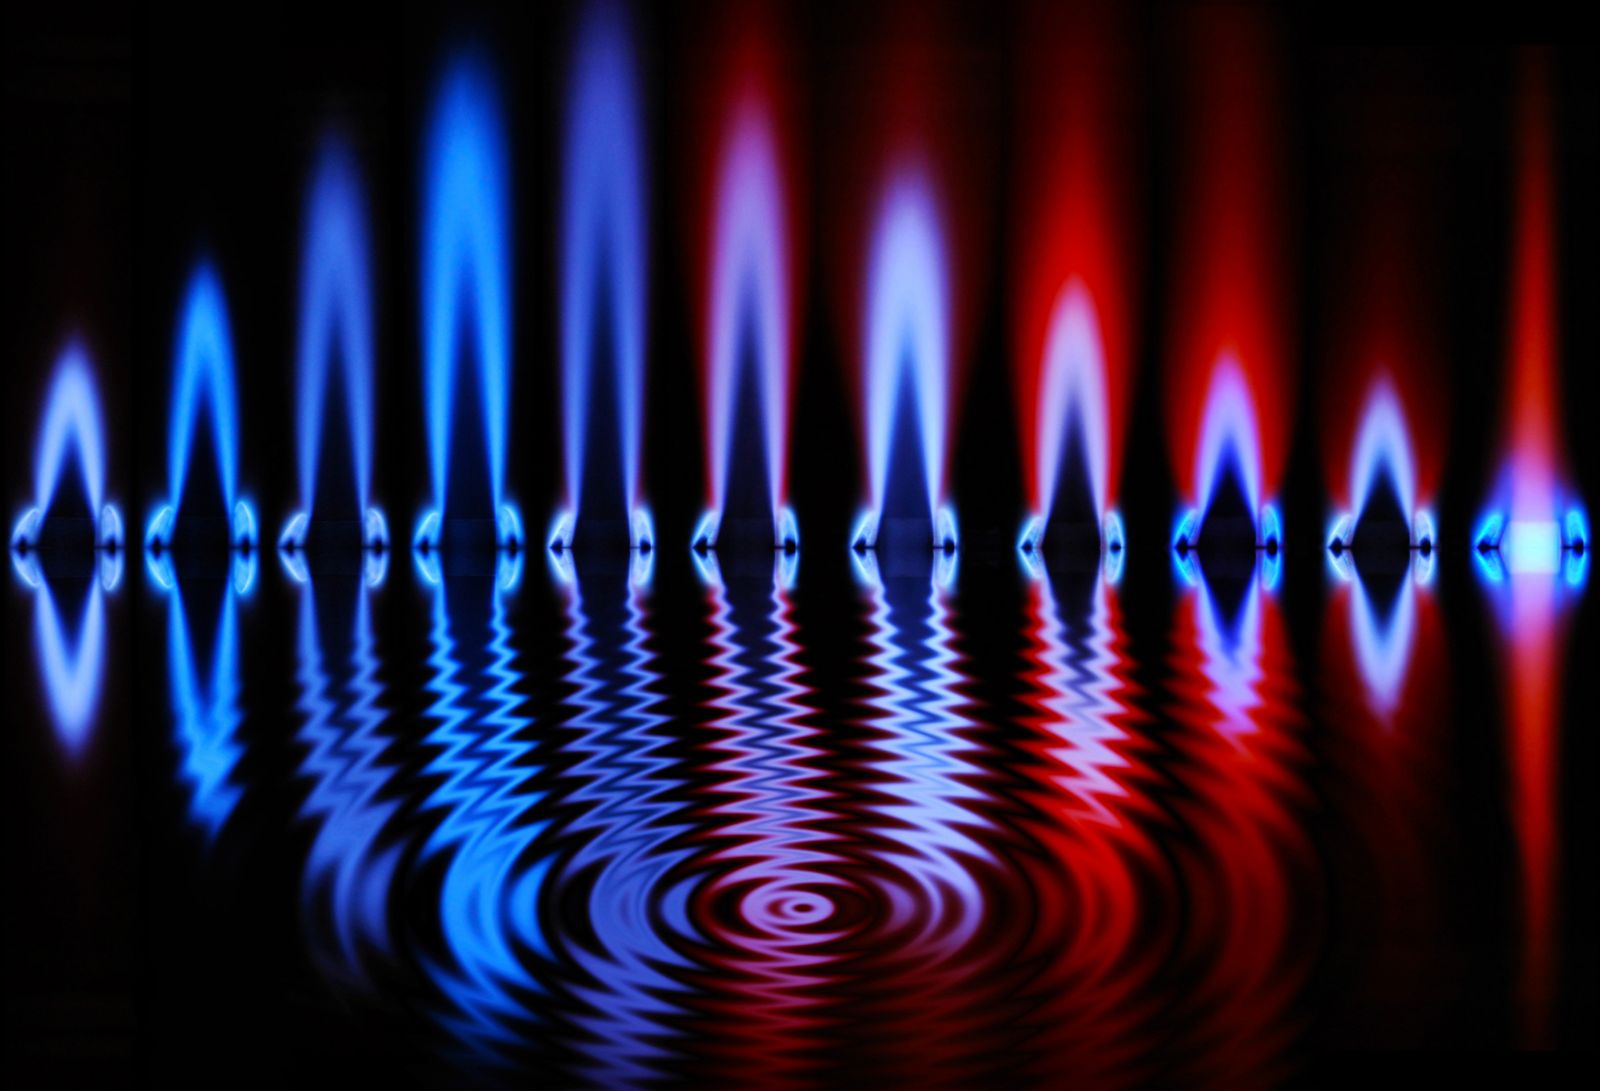 A series of flames demonstrates a transition as fuels are subjected to low-temperature oxidation prior to their introduction to a high-temperature flame. This transition has implications for the properties of the flames, including burning rates and emissions. Such investigations into the fundament science of combustion will contribute to the development of innovative energy conversion processes and transformational technologies at Princeton.